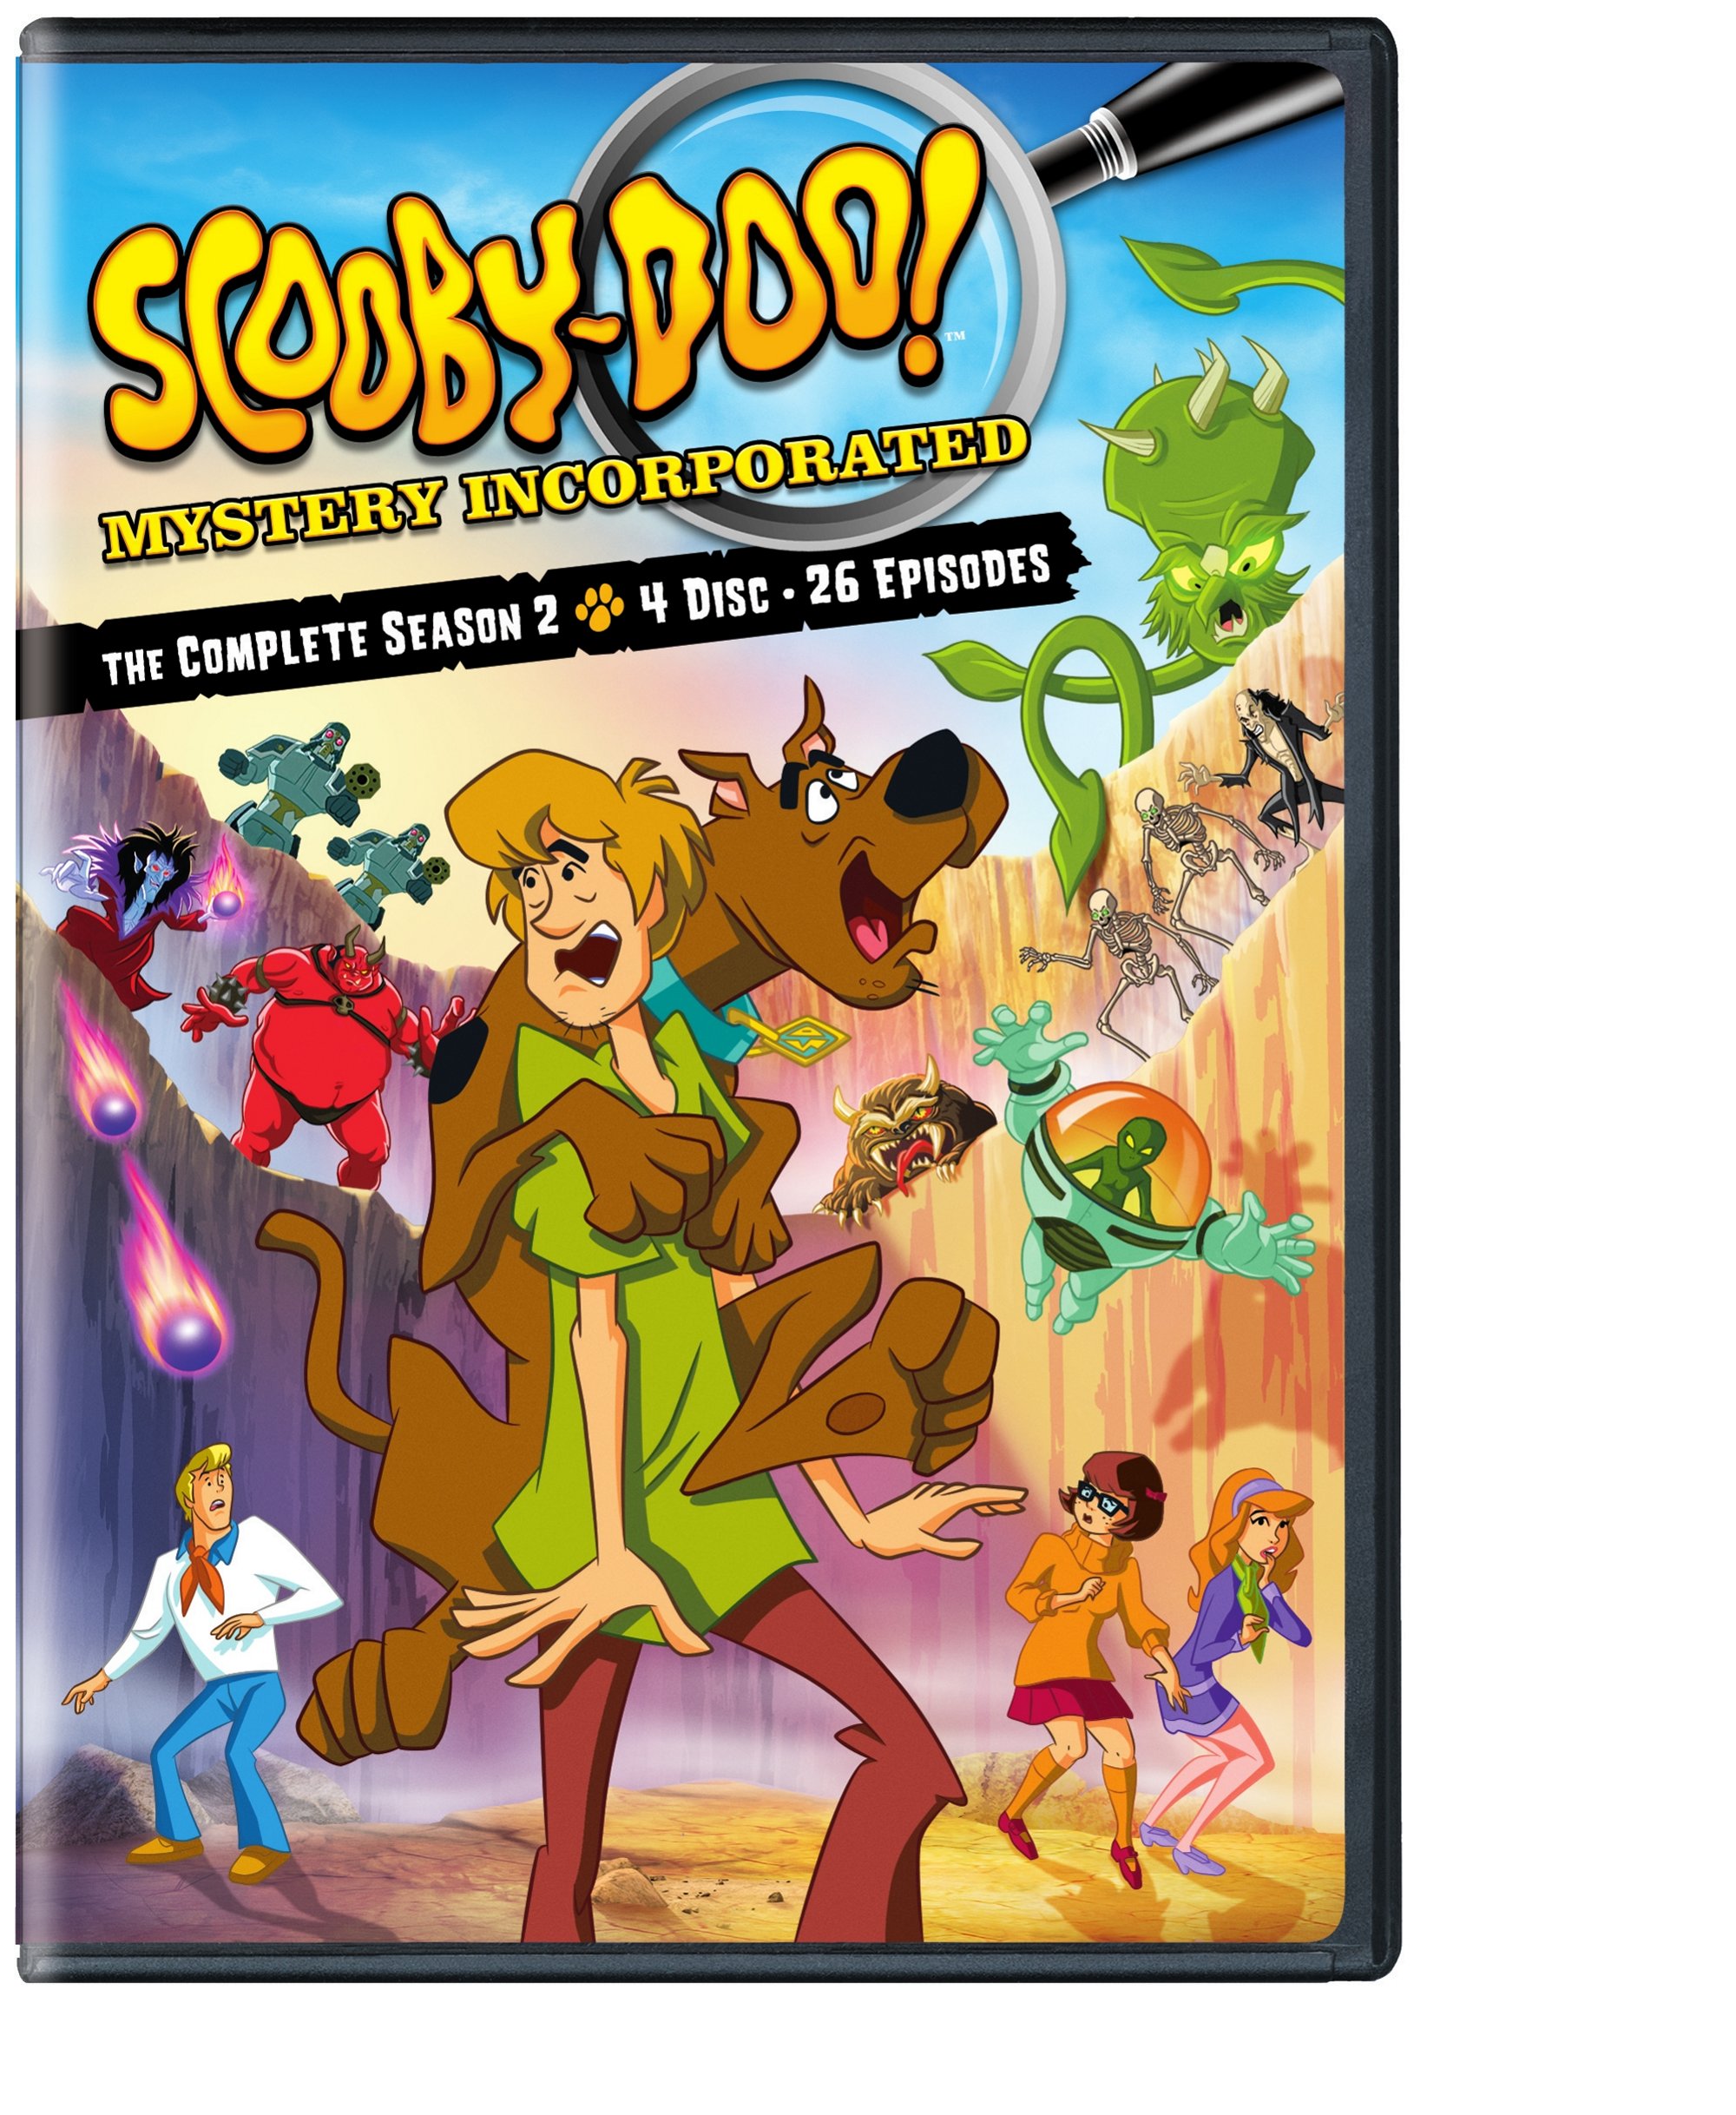 Mystery Incorporated The Complete Season Two DVD now Available.